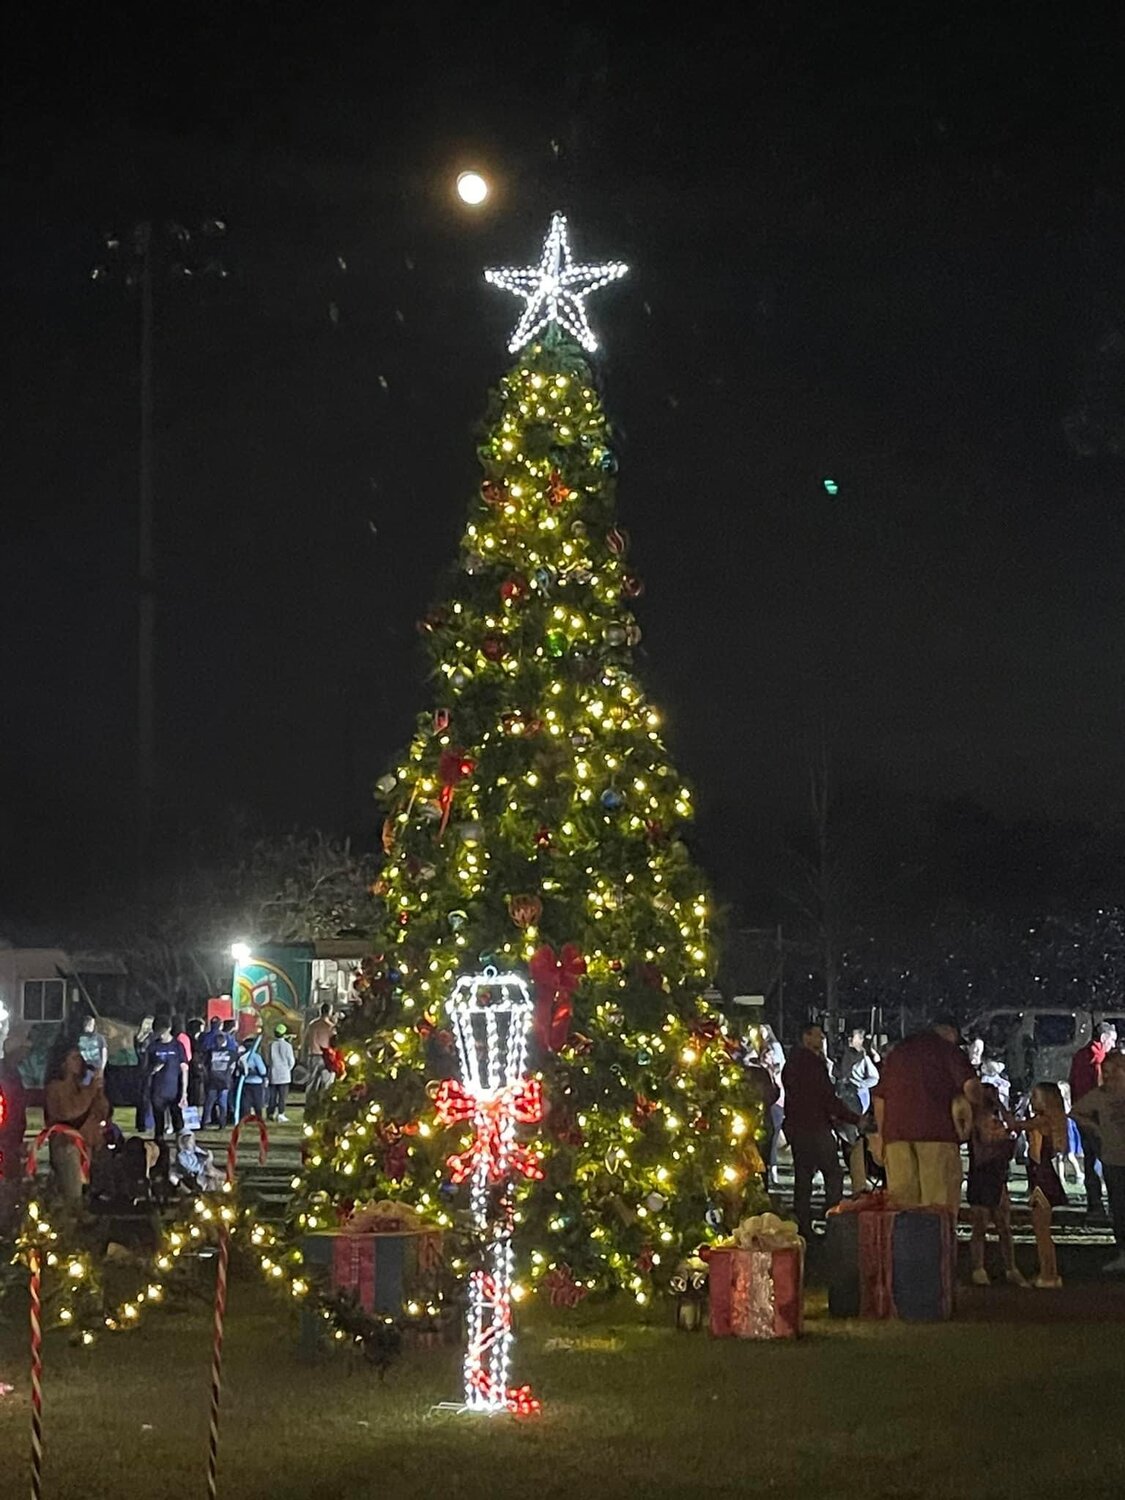 The City of Loxley will be having the Christmas Parade and the third annual Christmas in the Park on Dec. 8. A new feature this year will be the Festival of Trees lighting celebration.